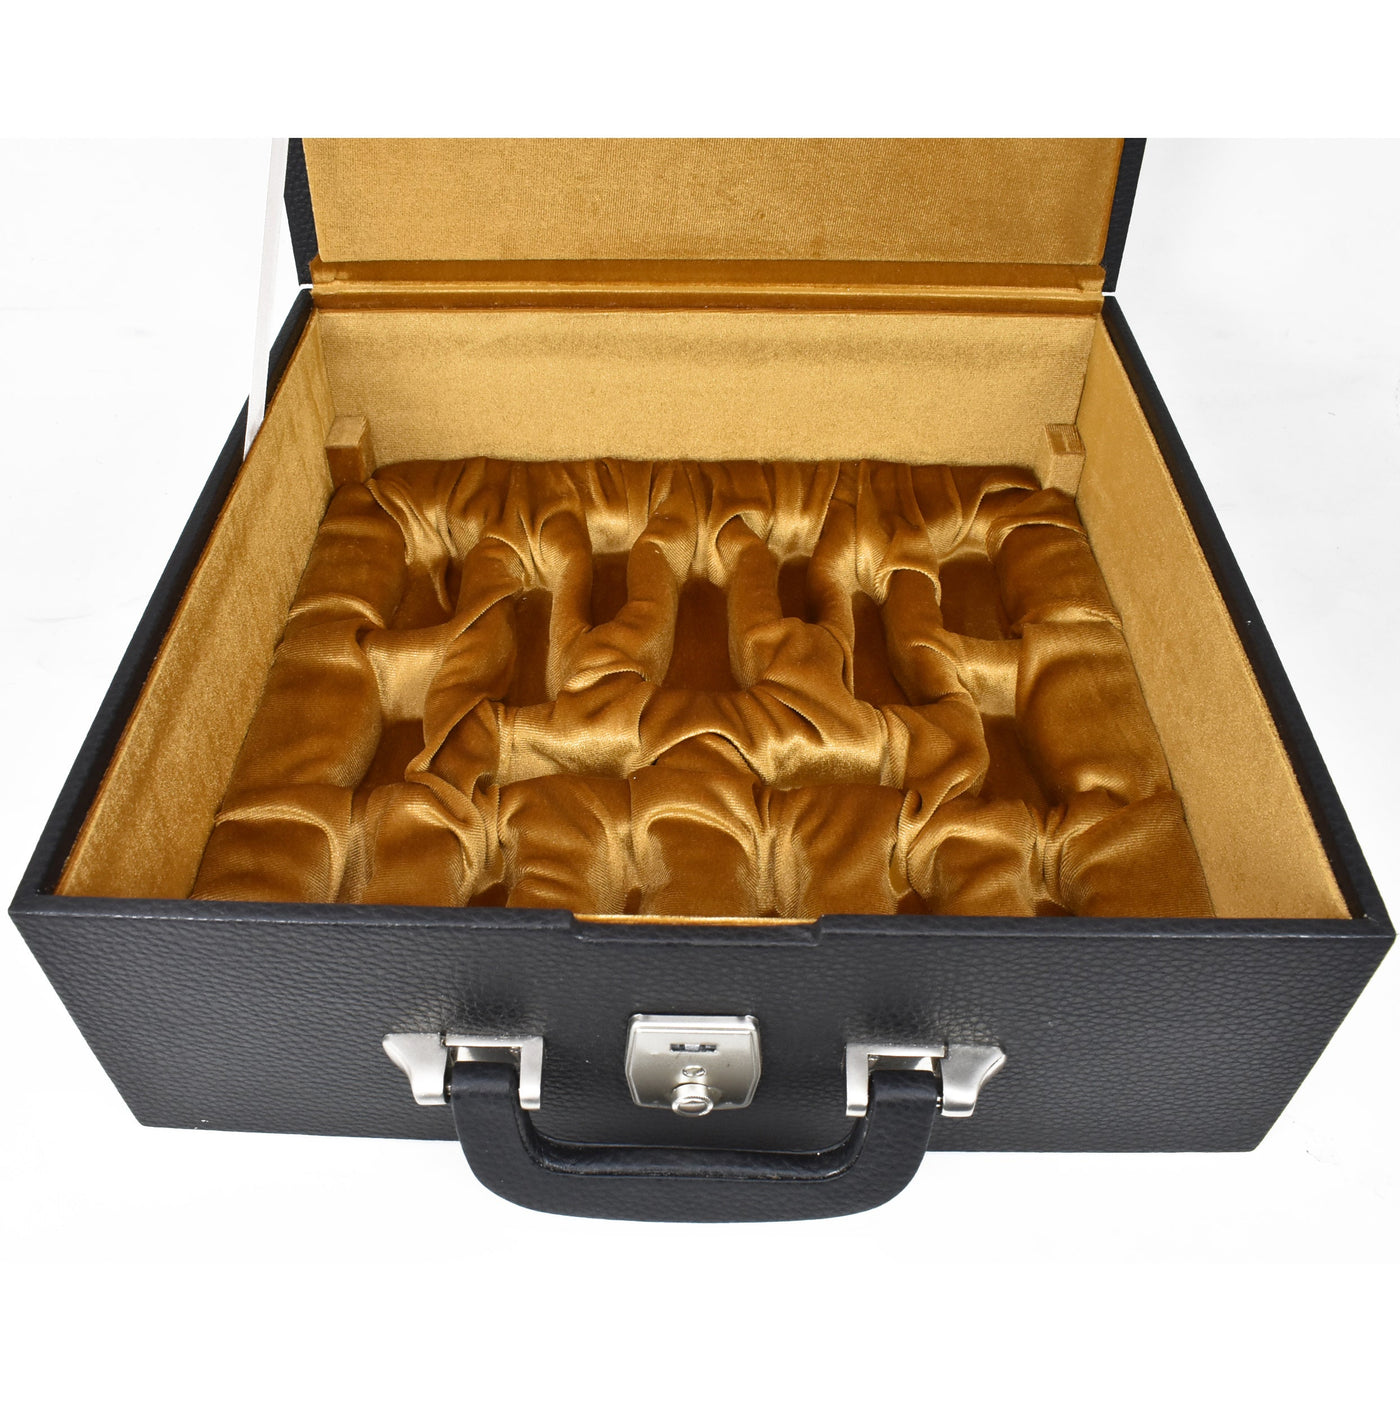 Combo of 4.1" Vanguard Series Staunton Chess Set - Pieces in Black & Gold Painted Boxwood with Board and Box